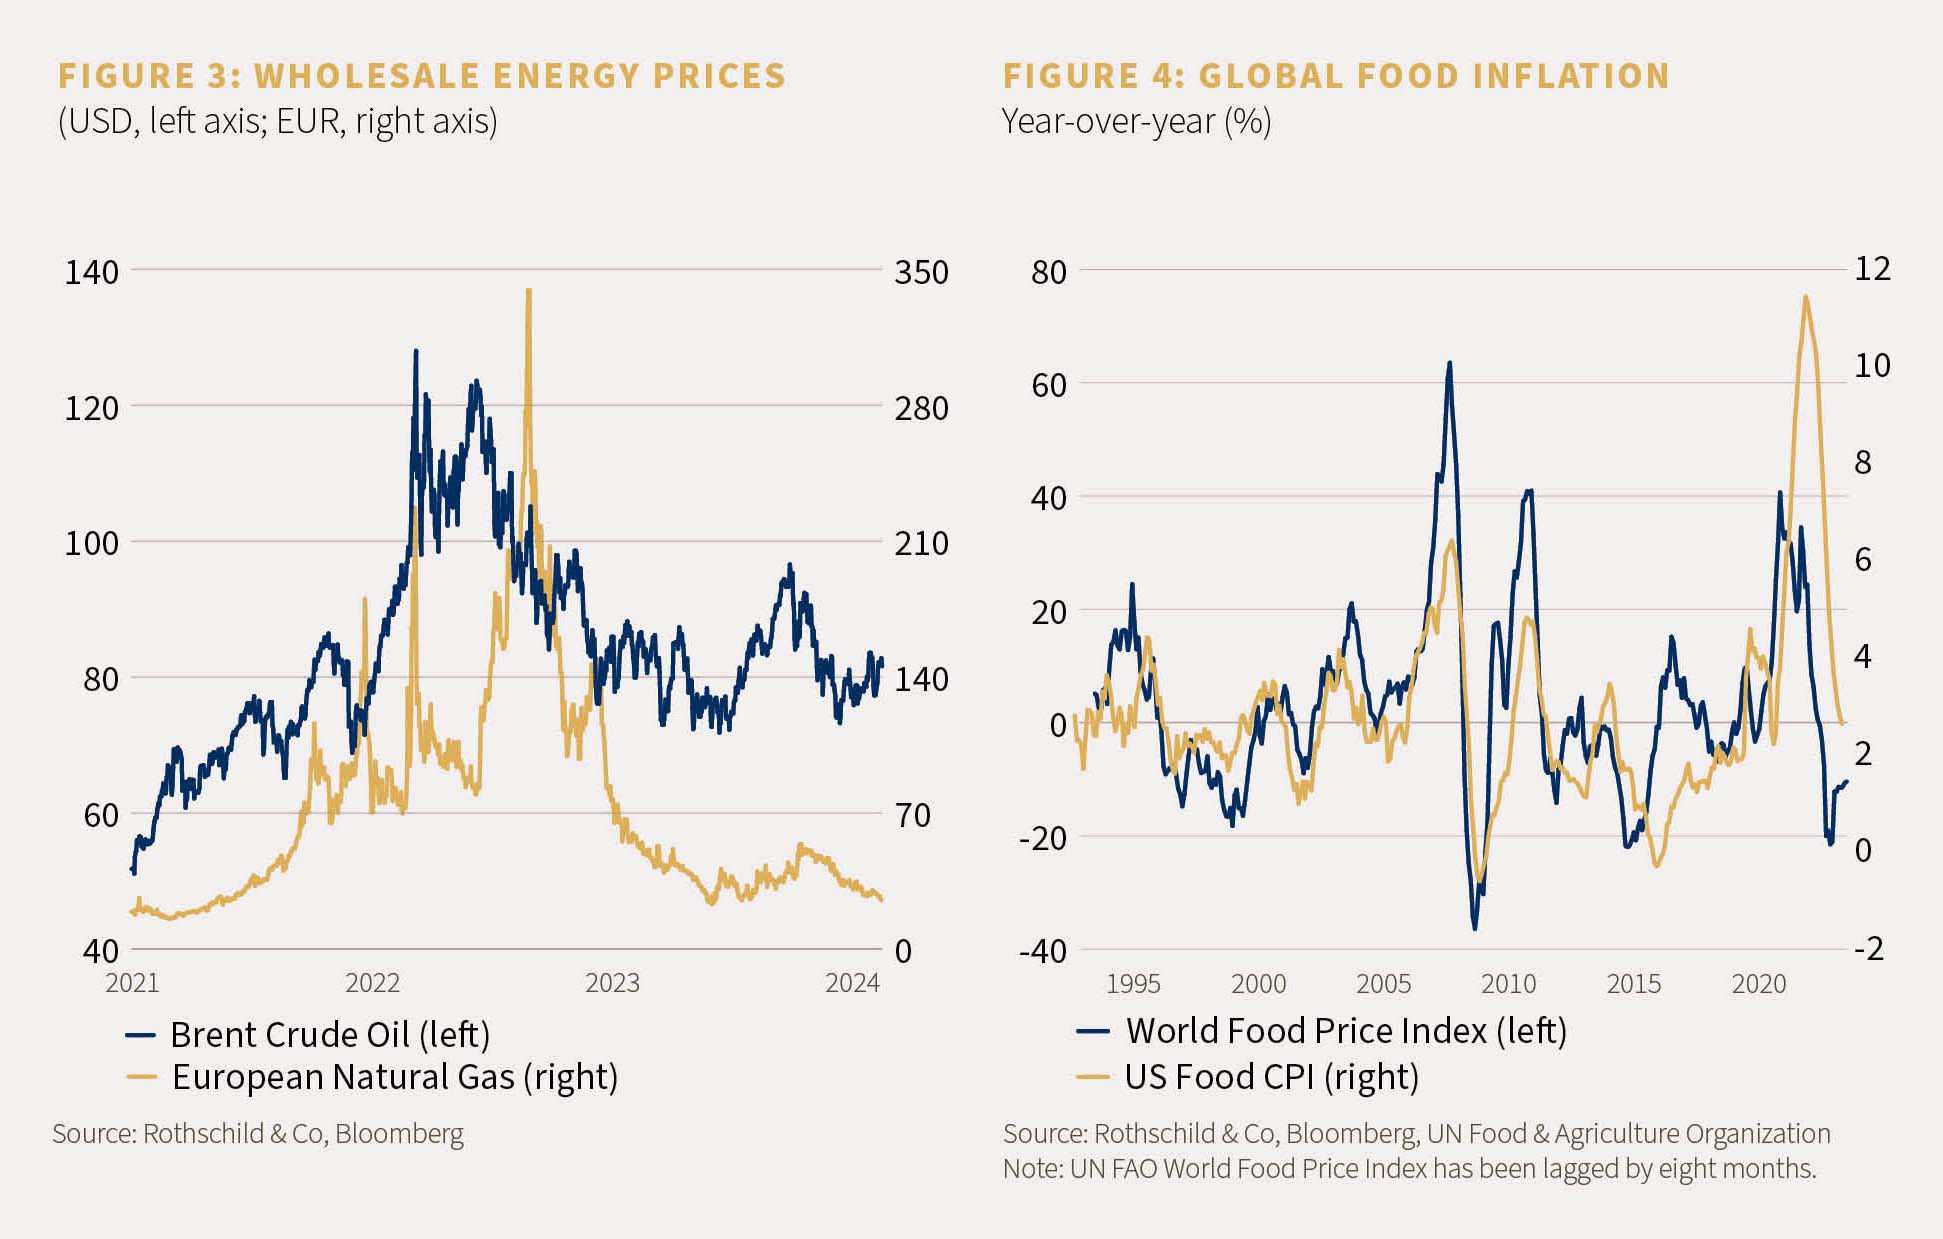 Figure 3 shows wholsale energy prices and figure 4 shows global food inflation.